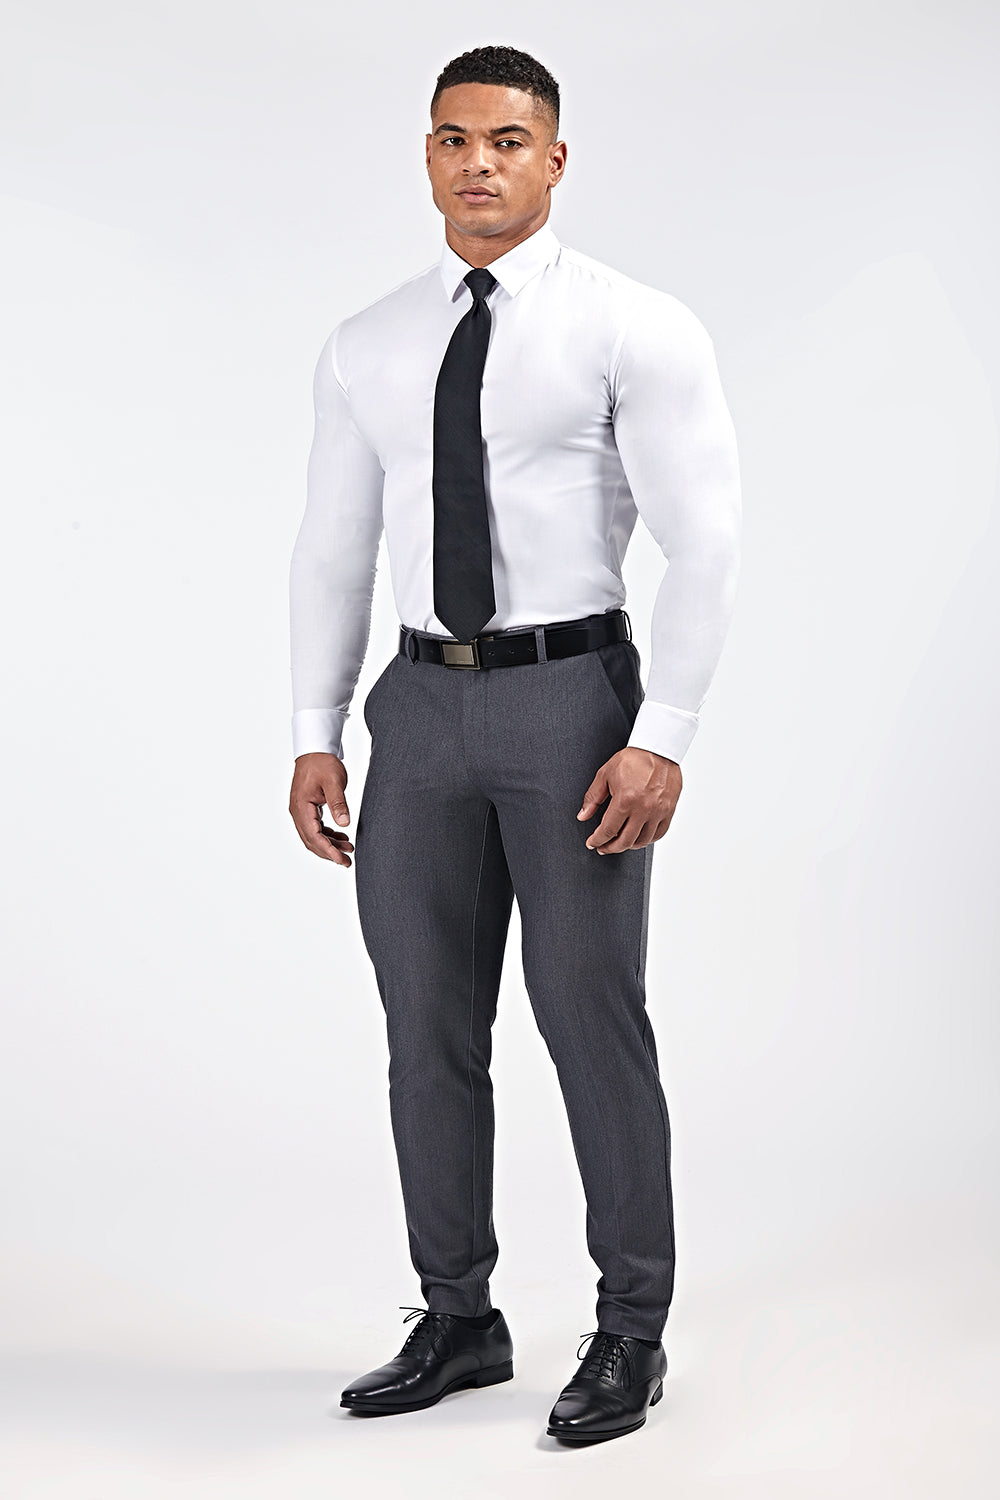 Men elegant white shirt grey trouser for office wear, mens formal shirt and  pants… | Formal shirts for men, Men fashion casual shirts, Mens business  casual outfits